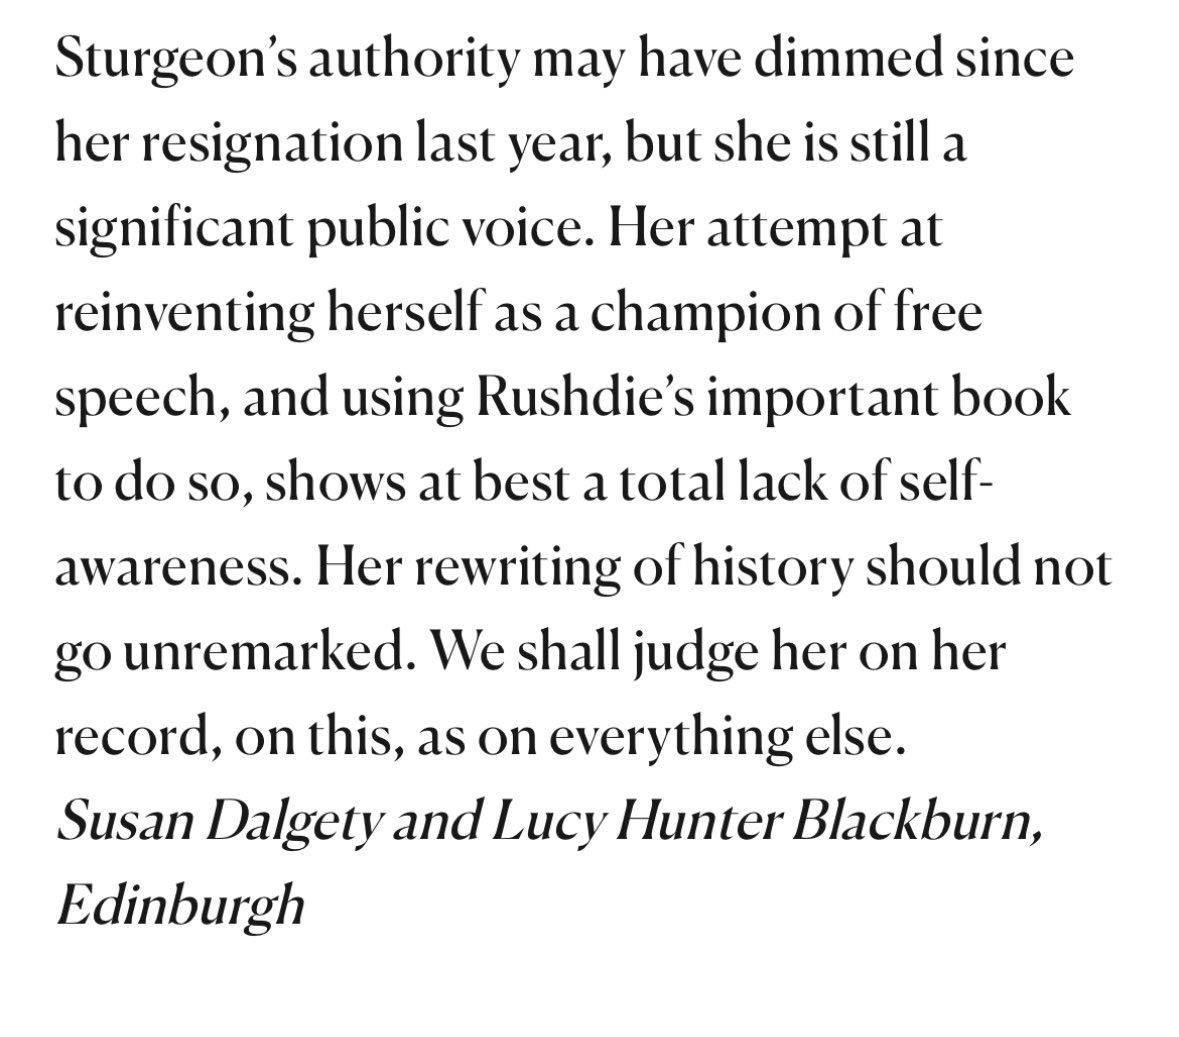 @LucyHunterB and I in @NewStatesman on Nicola Sturgeon’s attempt to portray herself as a free speech champion. The woman who dismissed views different to her own as ‘not valid’.